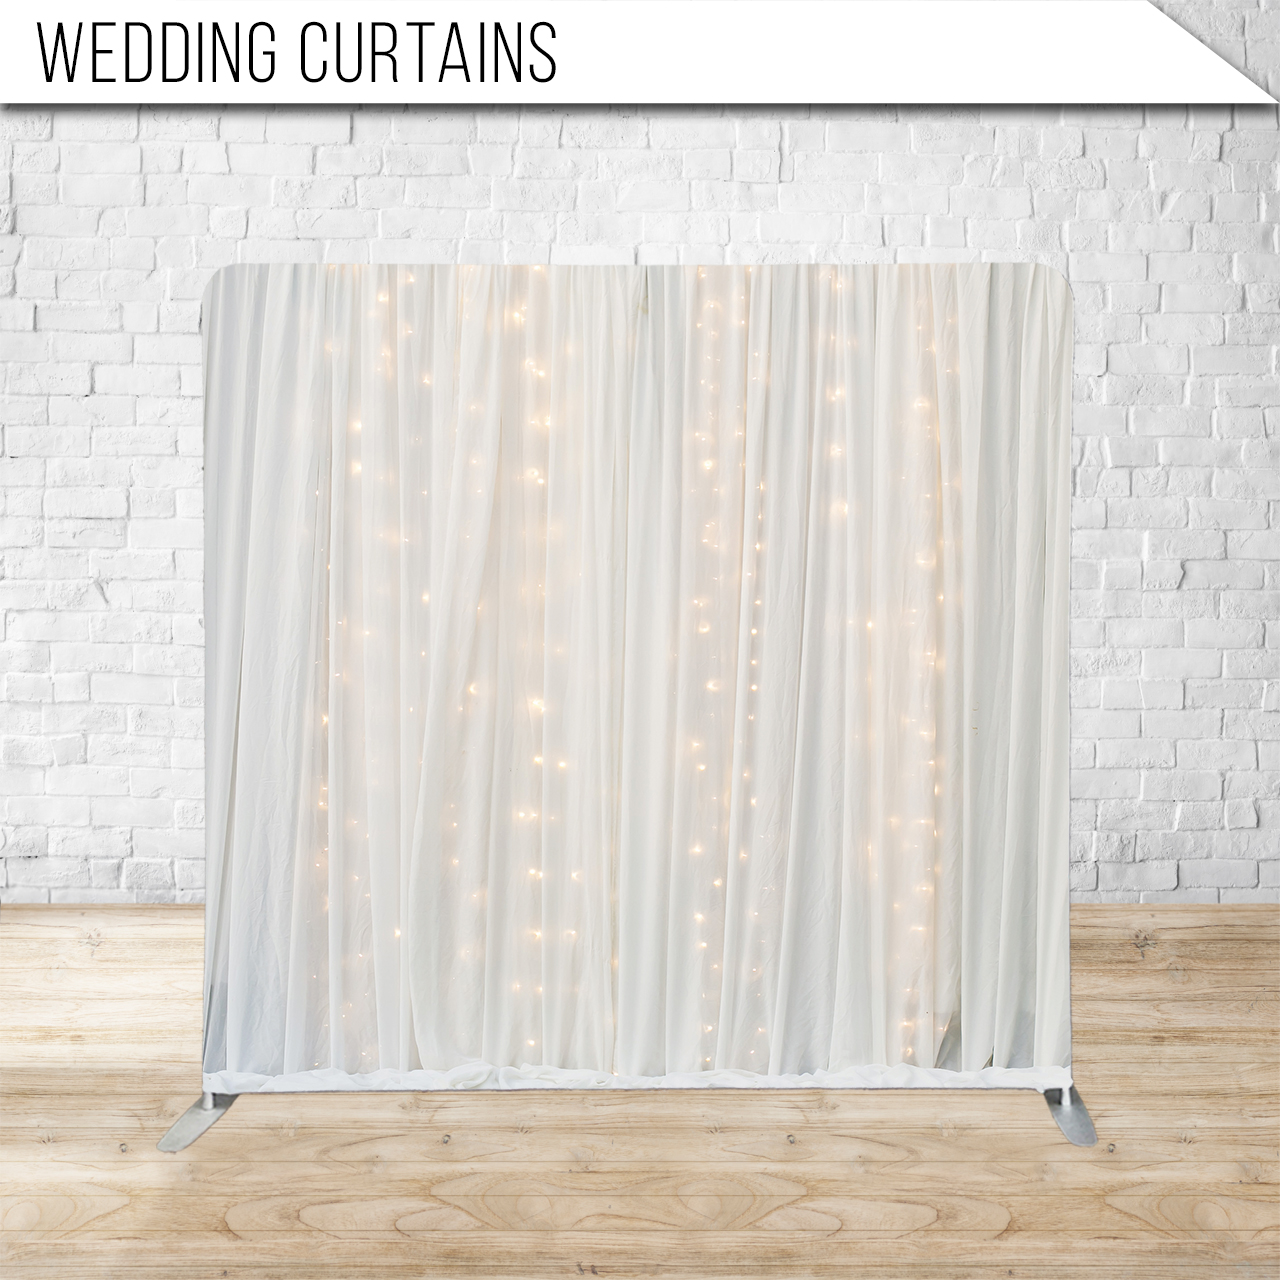 Trendy White Curtains with Fairy Lights behind the see through curtain photo booth back drop rental Noblesville Indiana